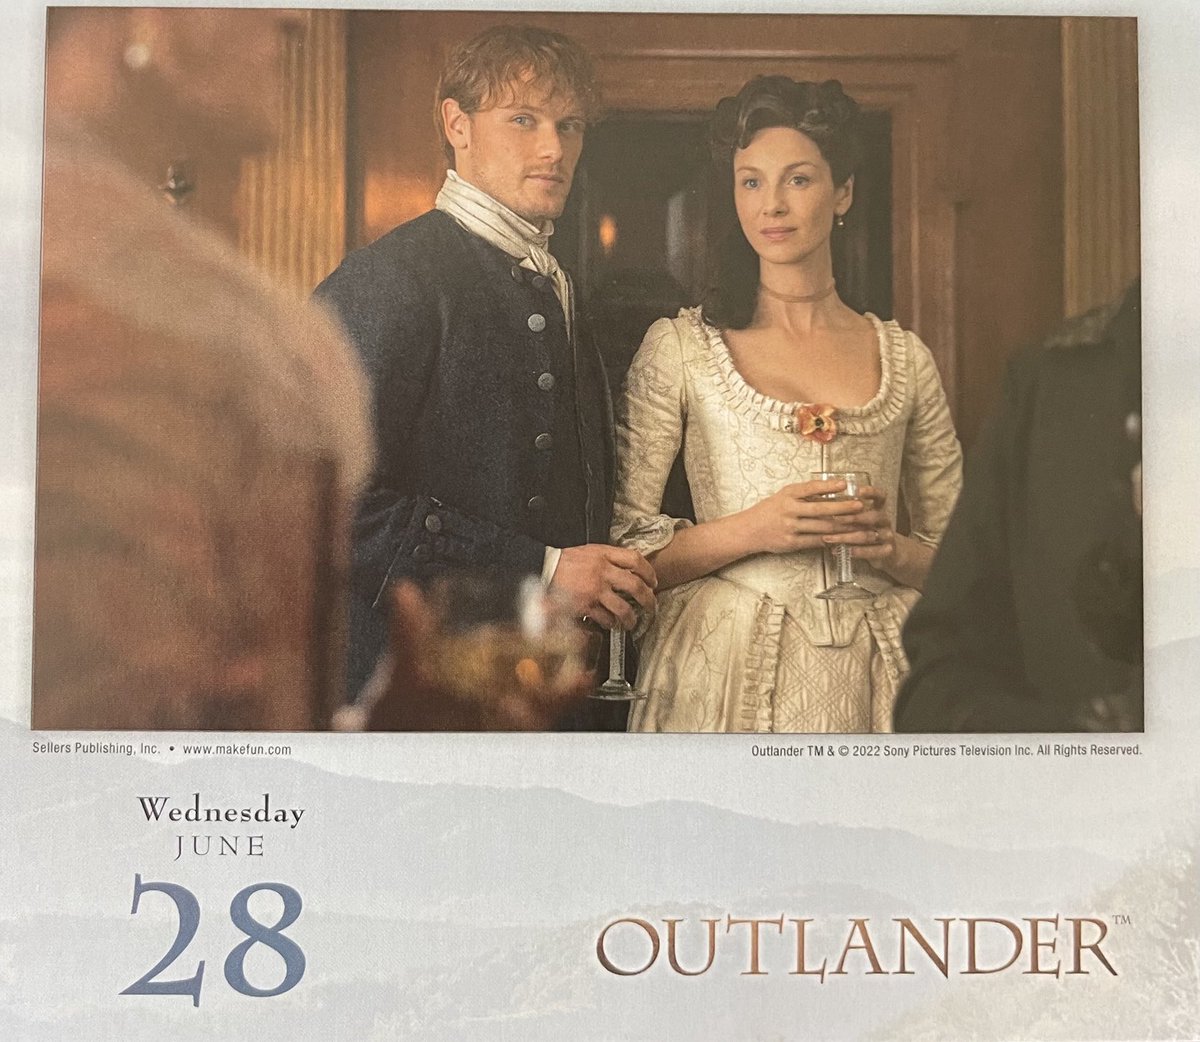 Happy Wednesday ❤️ I love this beautiful throwback to season 4 🥰 #Outlander #JamieandClaire Only 2️⃣ more days until Ep. 3 👏🏻🎉🥂